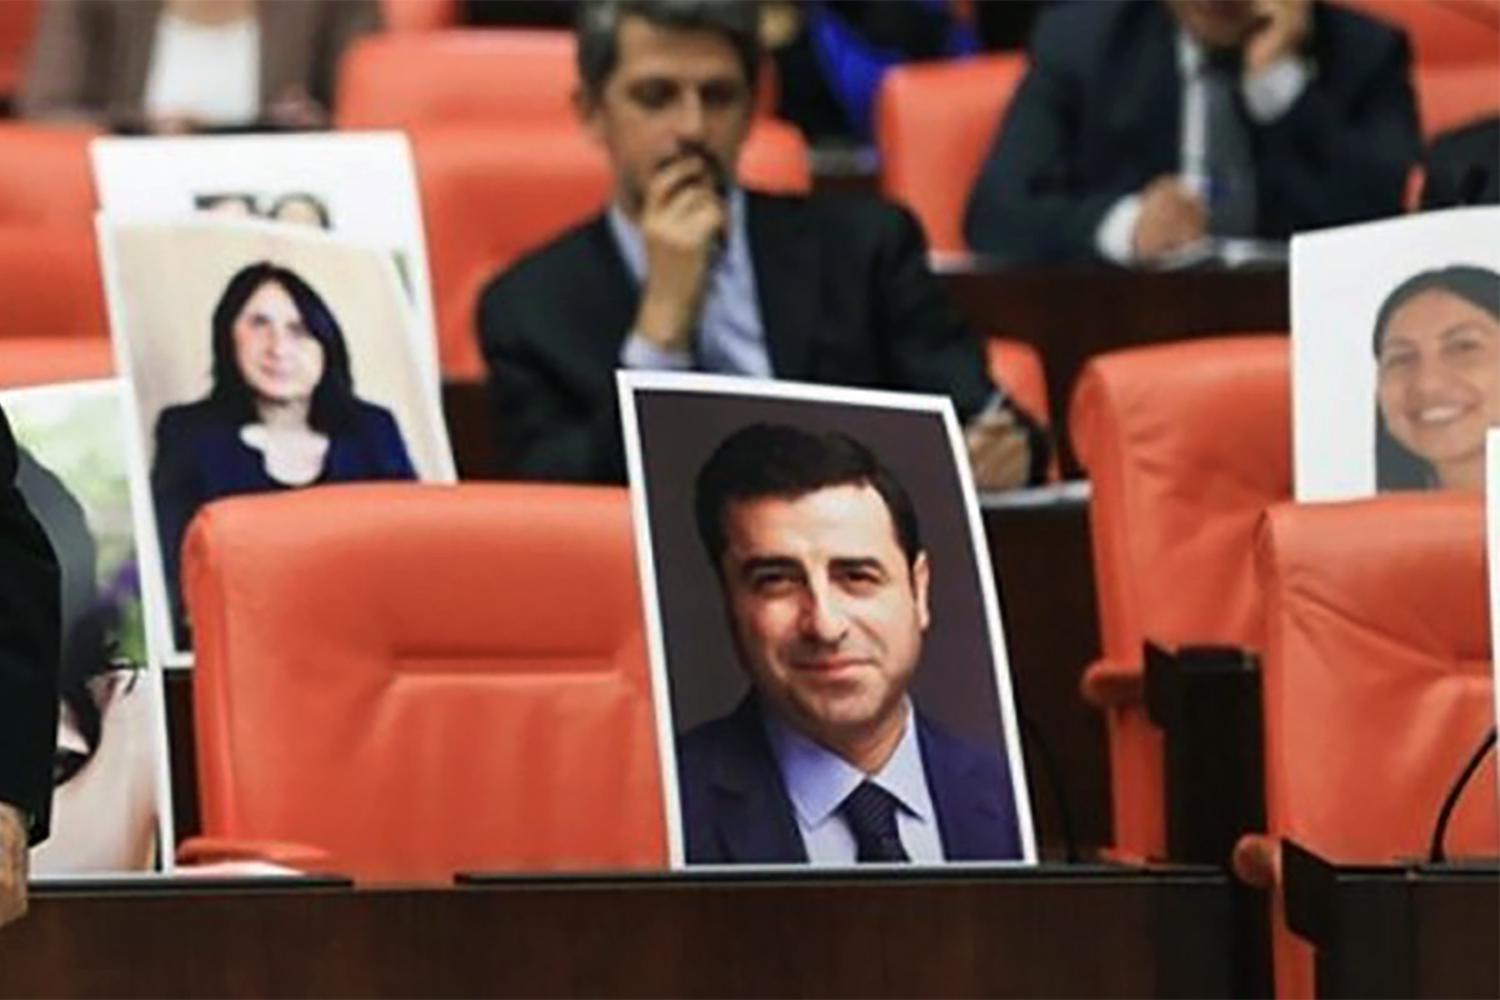 Selahattin Demirtaş, co-leader of the Peoples’ Democratic Party (HDP), was among MPs jailed on November 4, 2016. His vacant seat in the general assembly of the parliament was marked with his photo 